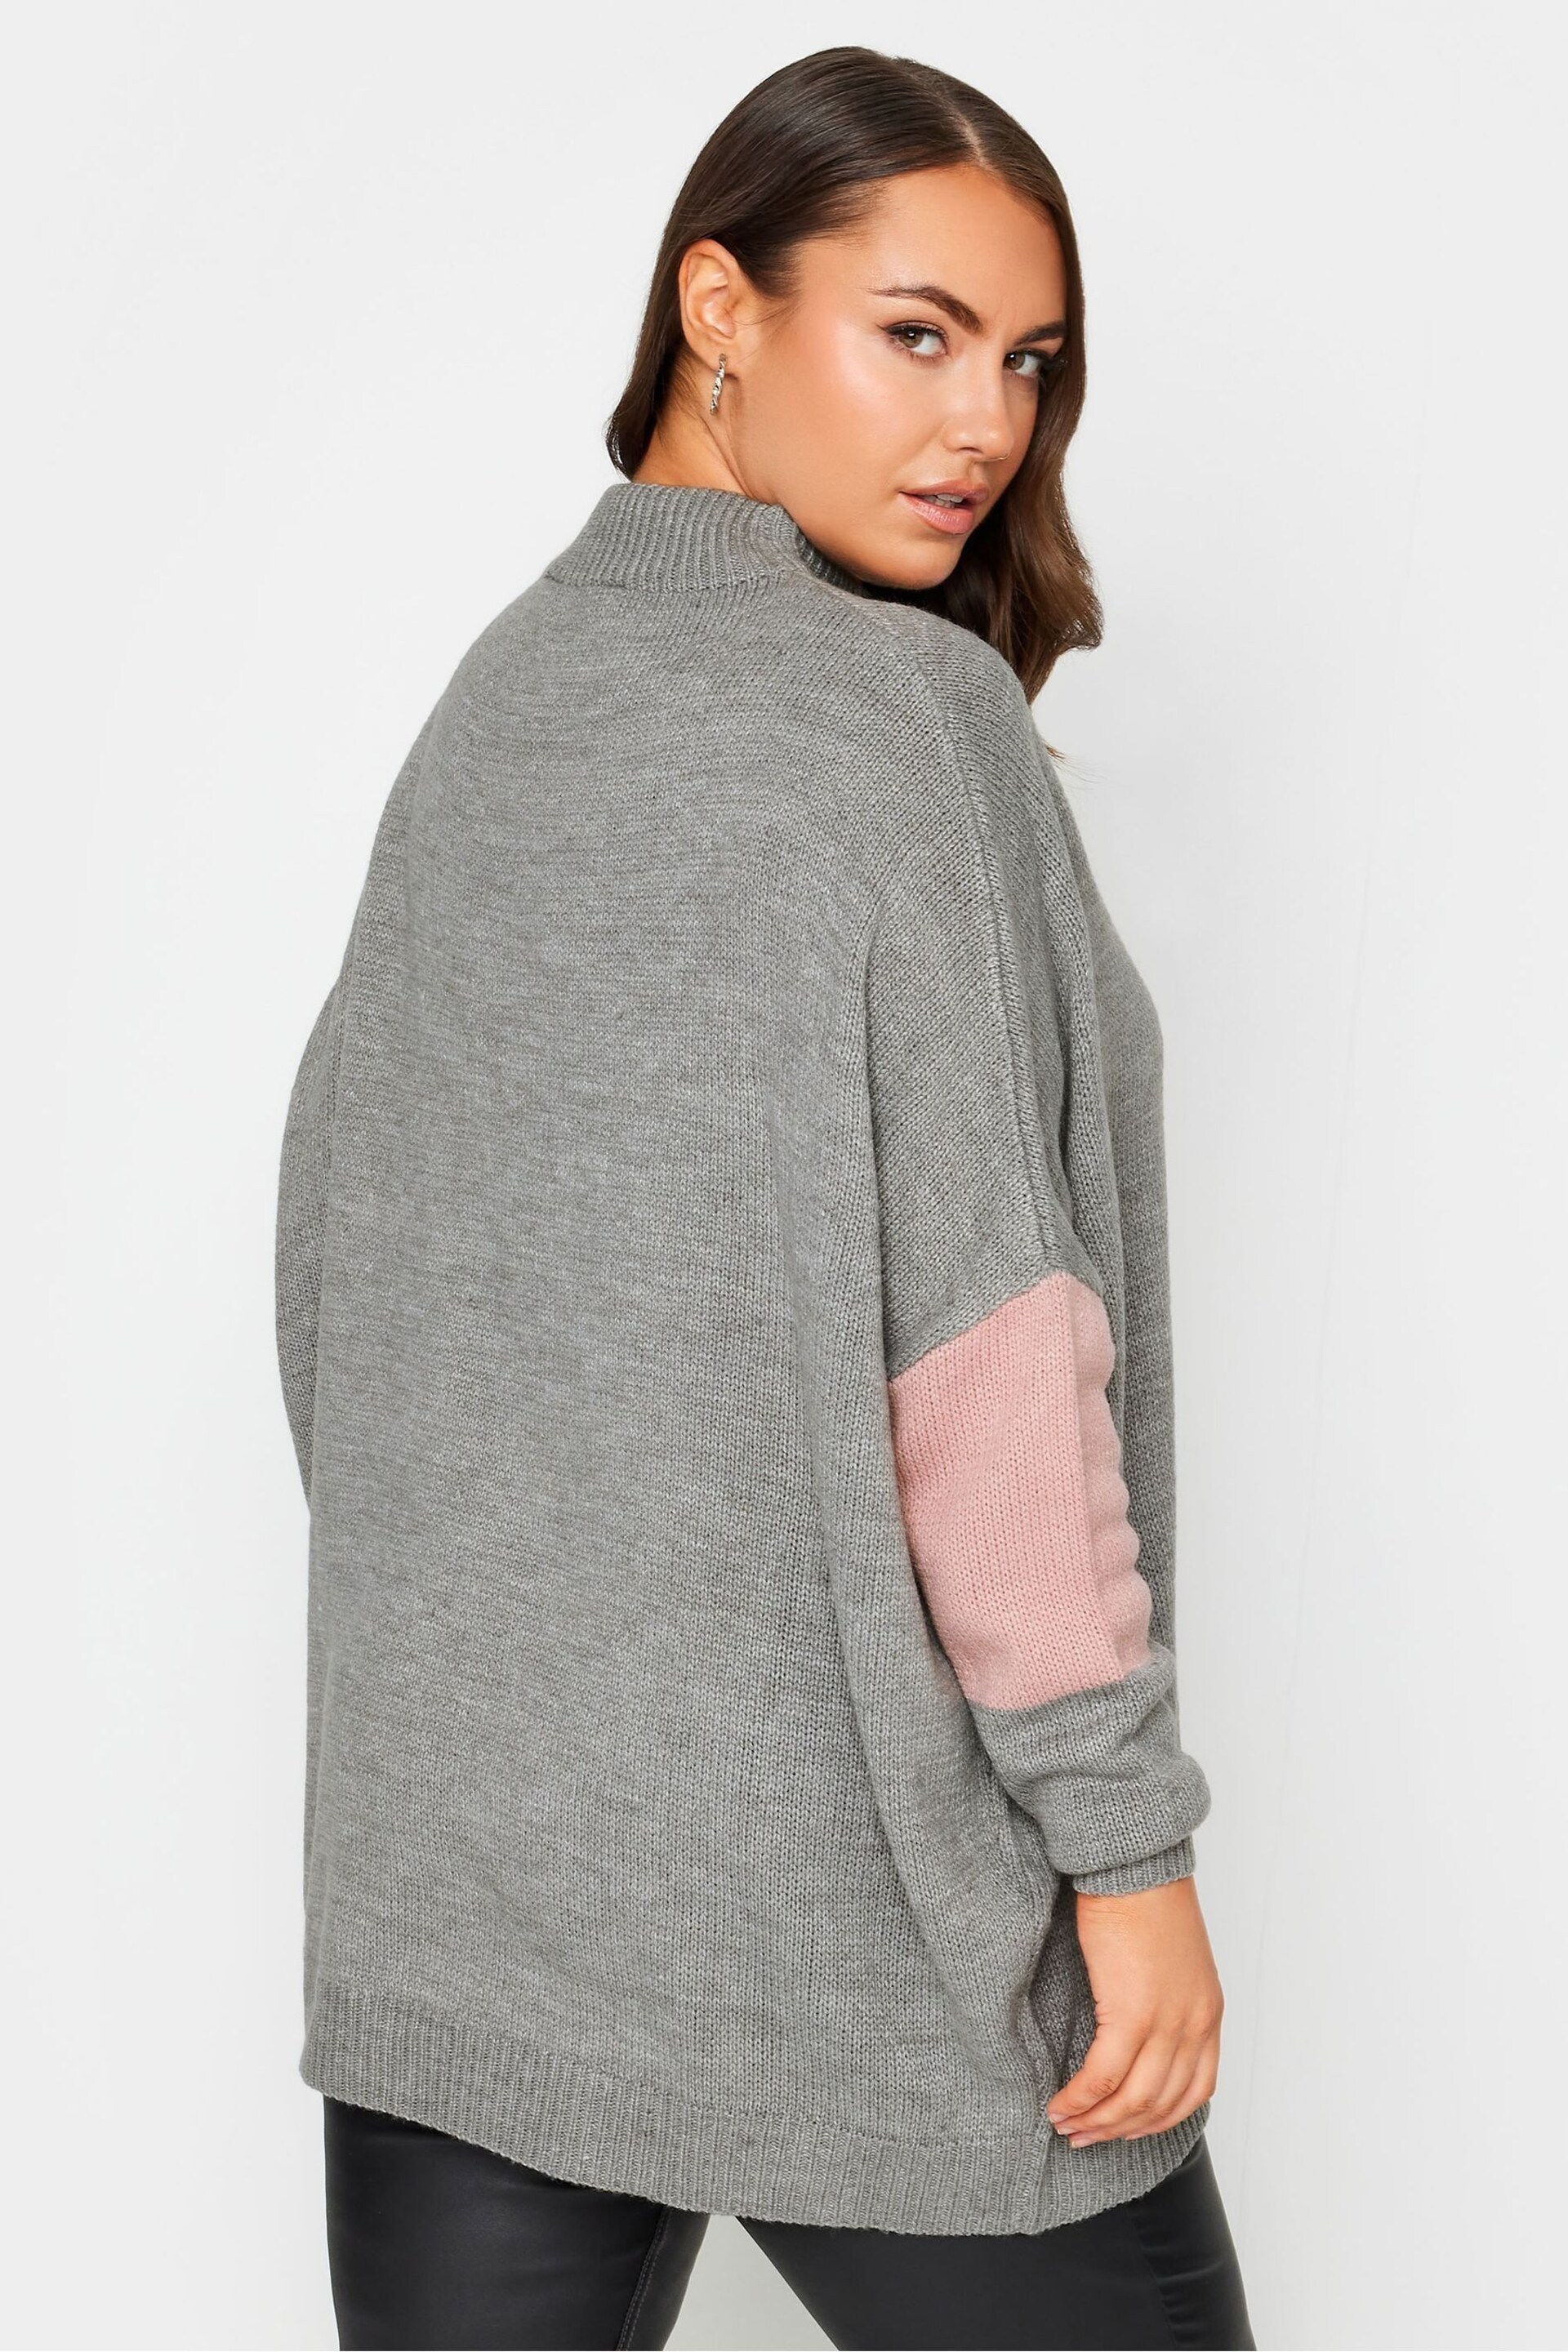 Yours Curve Grey Oversize Colourblock Jumper - Image 2 of 4